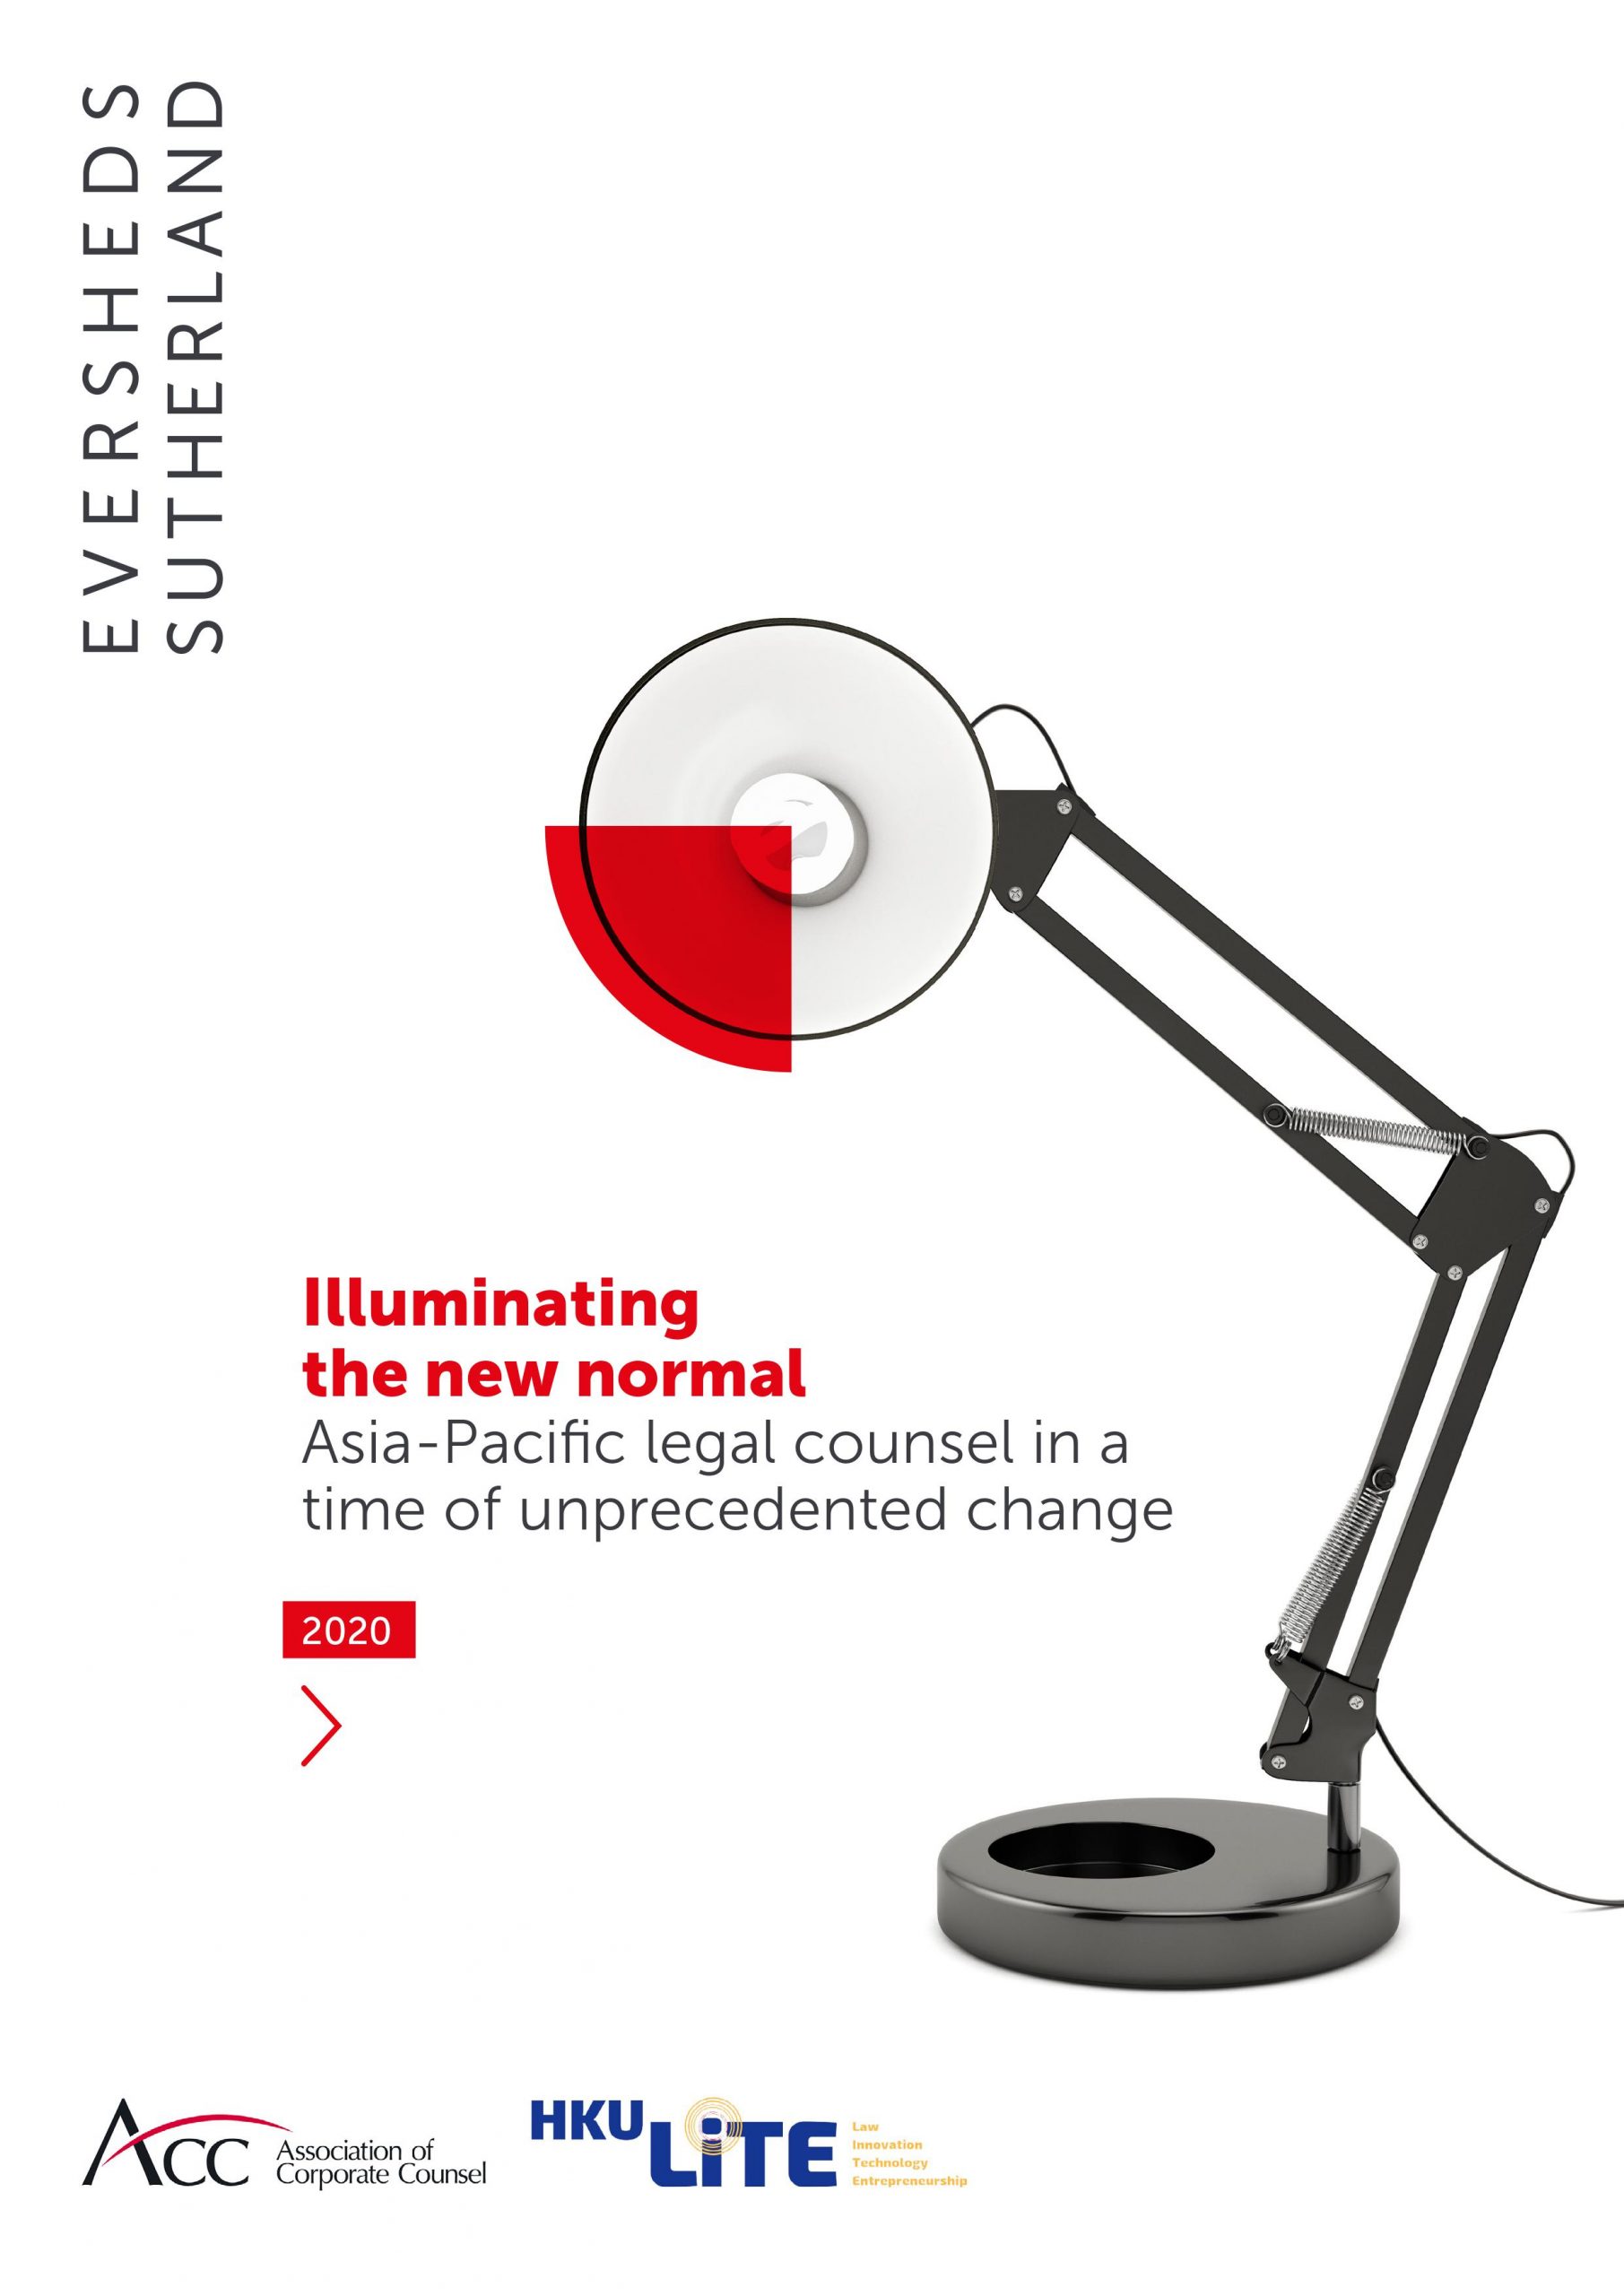 ACC, Eversheds Sutherland and LITE Lab published a report Legal Counsel in entitled the “New Normal” – Leadership, Transformation and Implementation in a Time of Unprecedented Change”